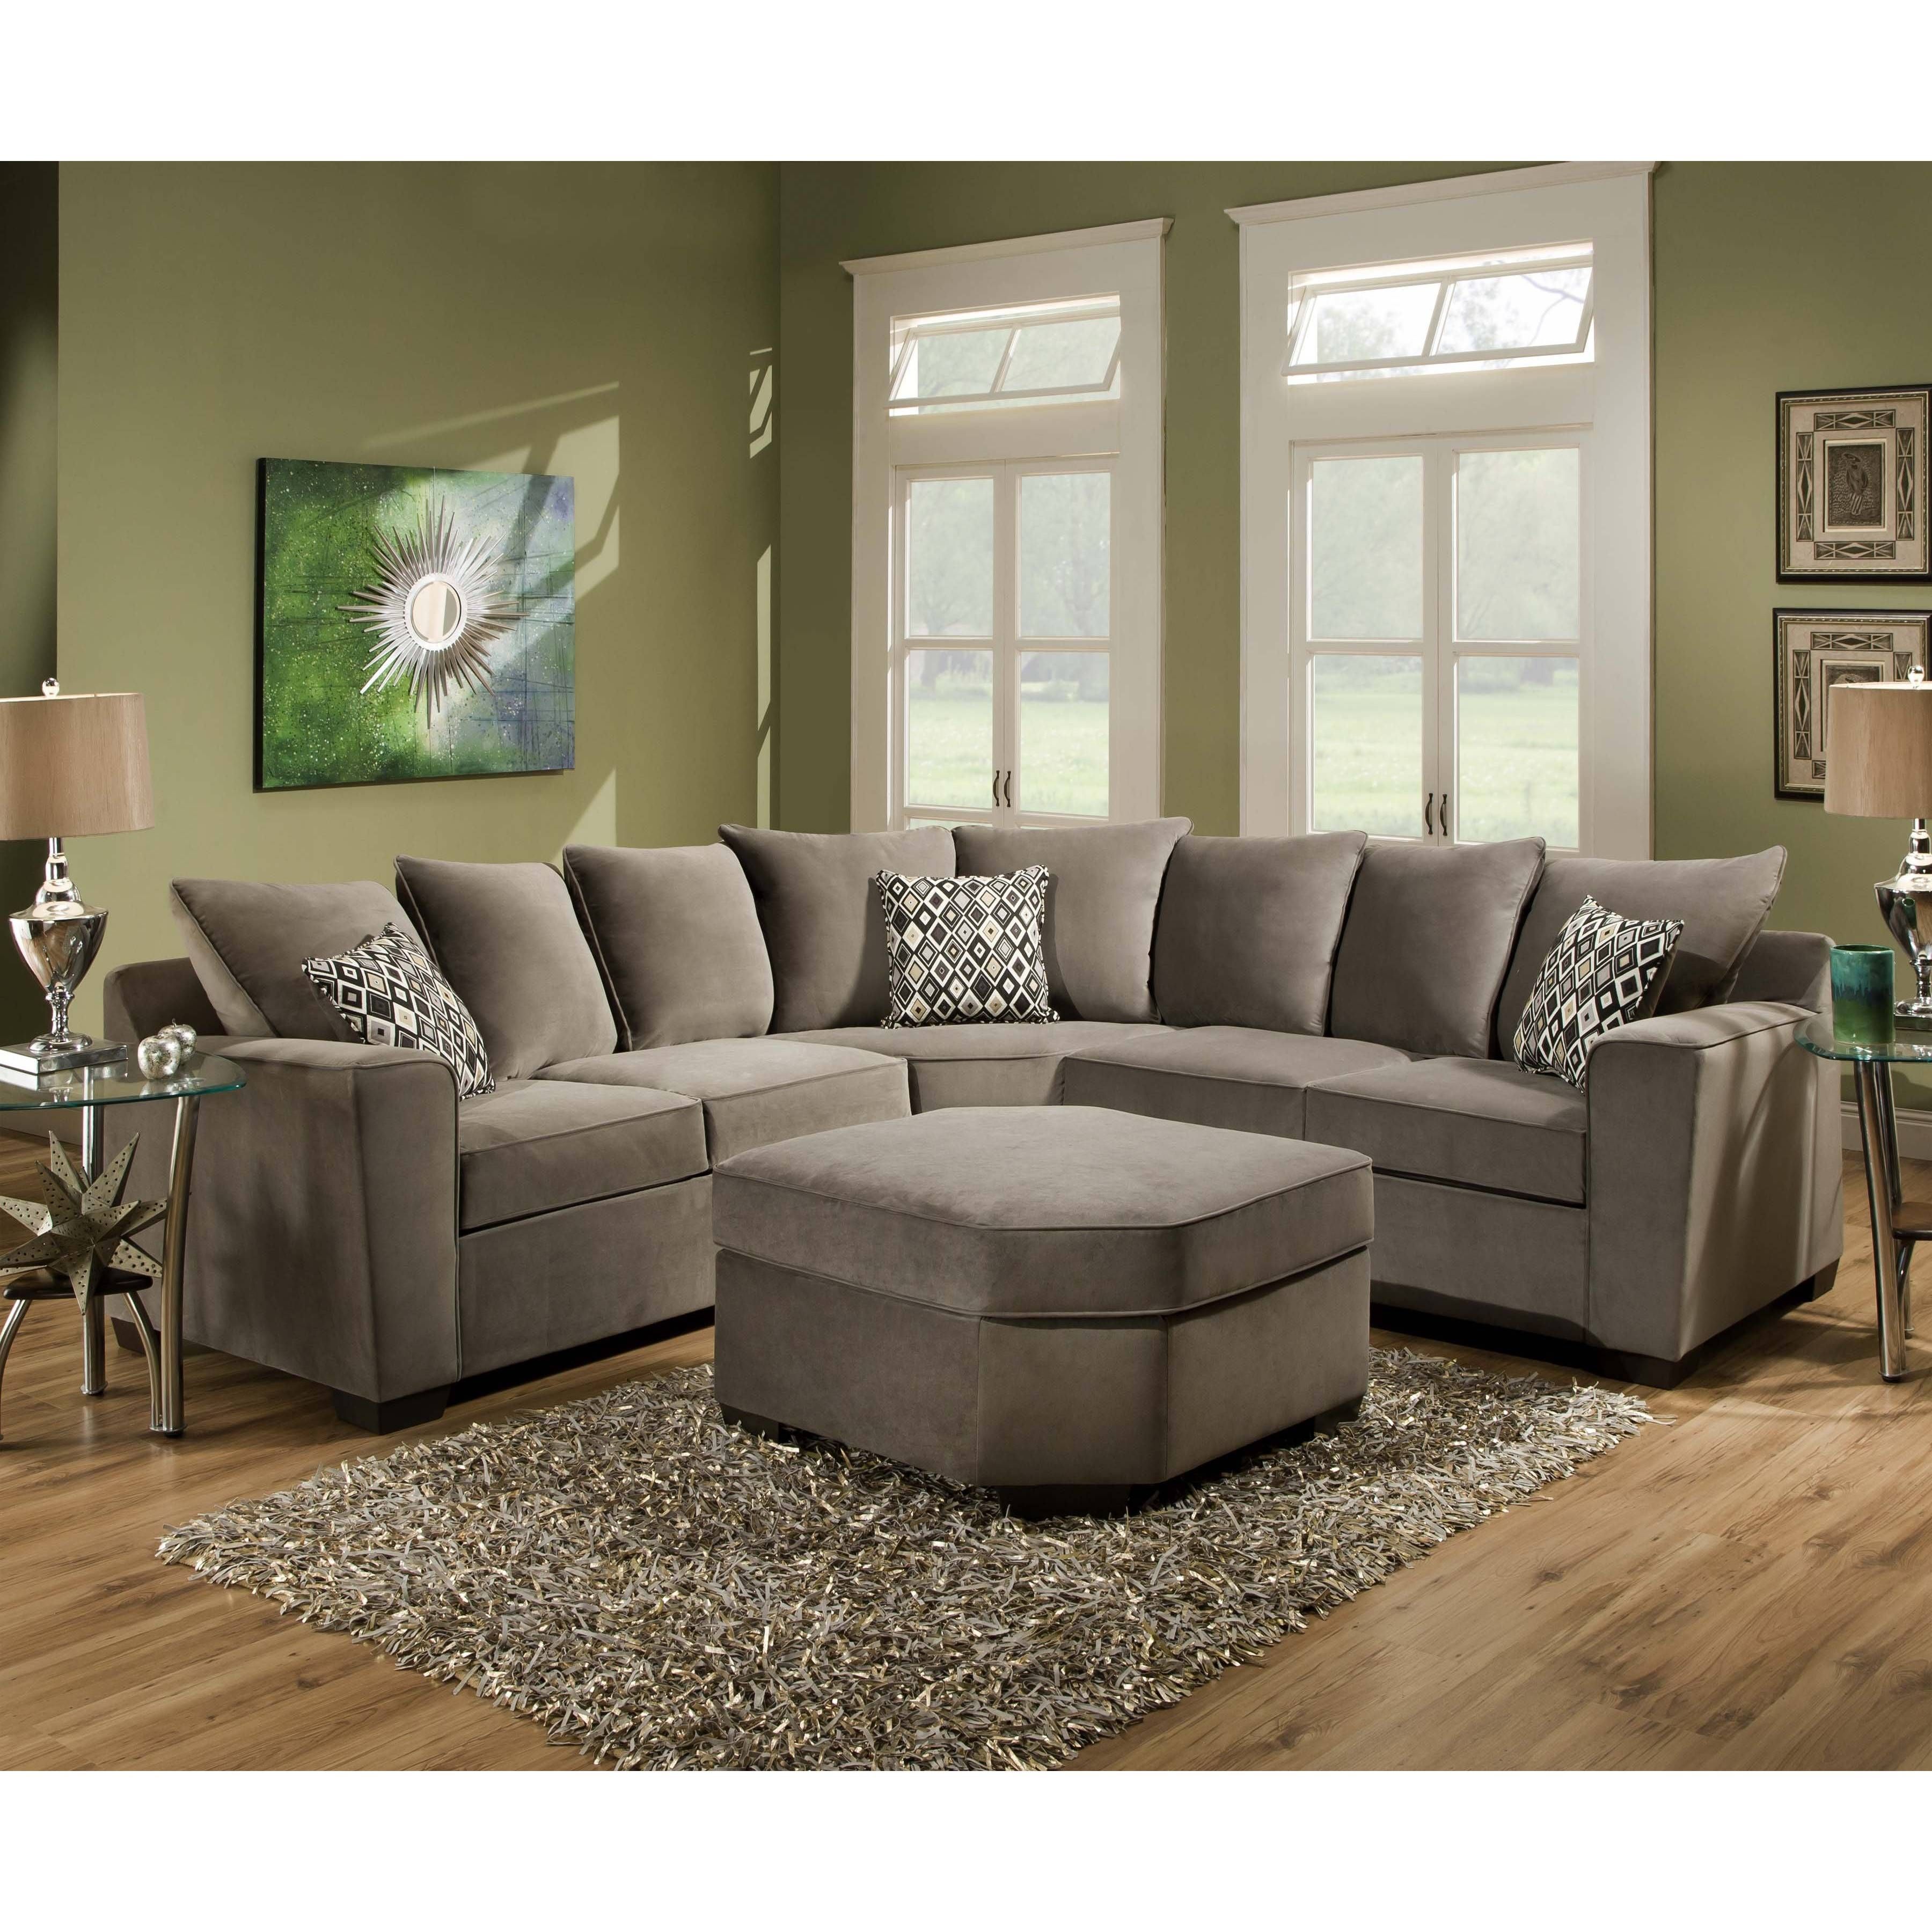 Epic Cheap U Shaped Sectional Sofas 35 About Remodel Backless In Backless Sectional Sofa (View 8 of 30)